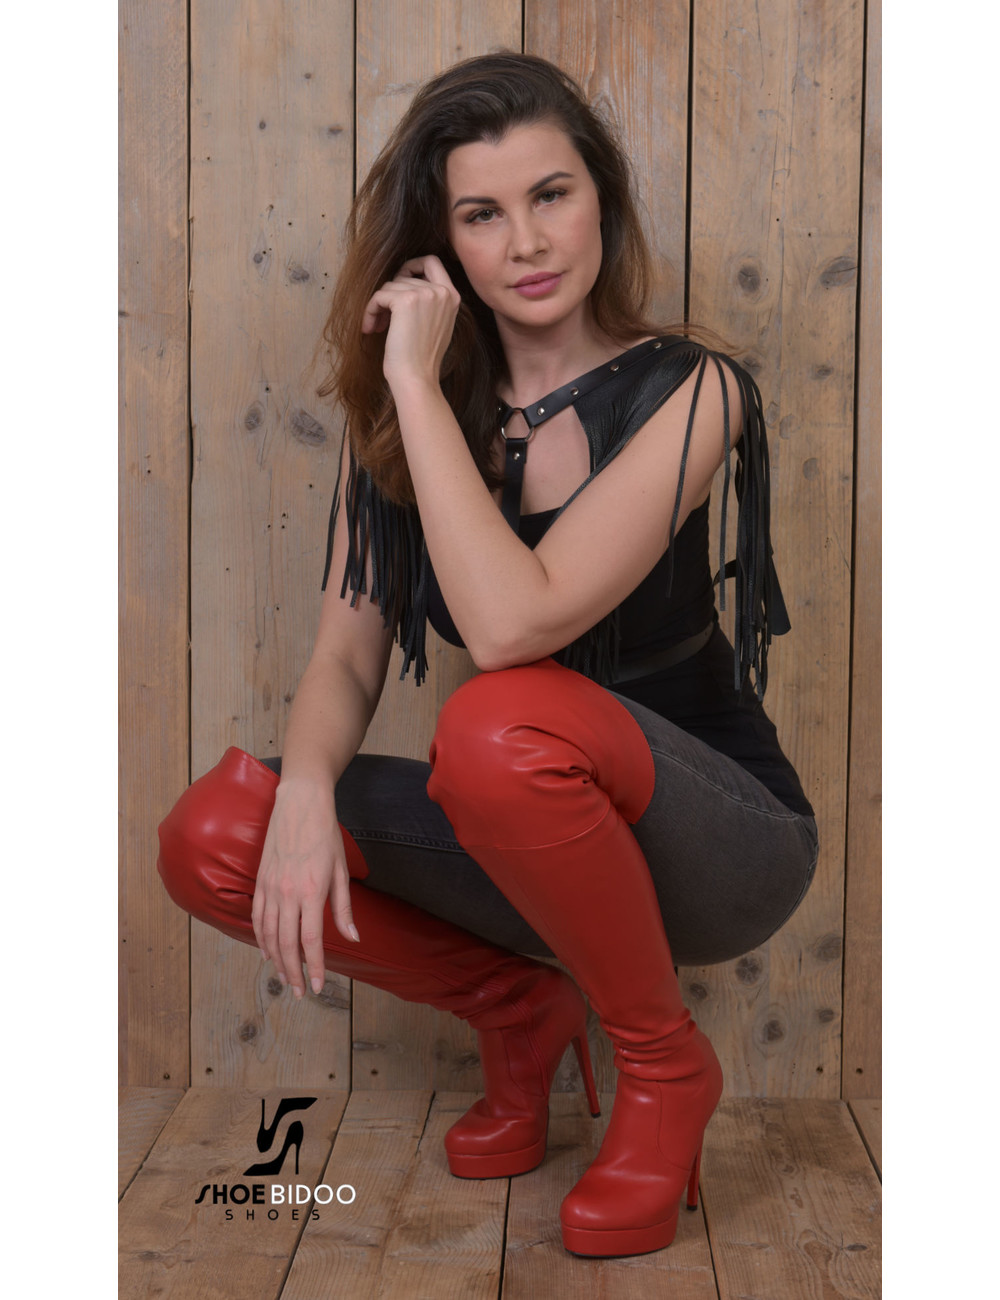 Jumex Vegan Red thigh boots with ultra high heels and platform